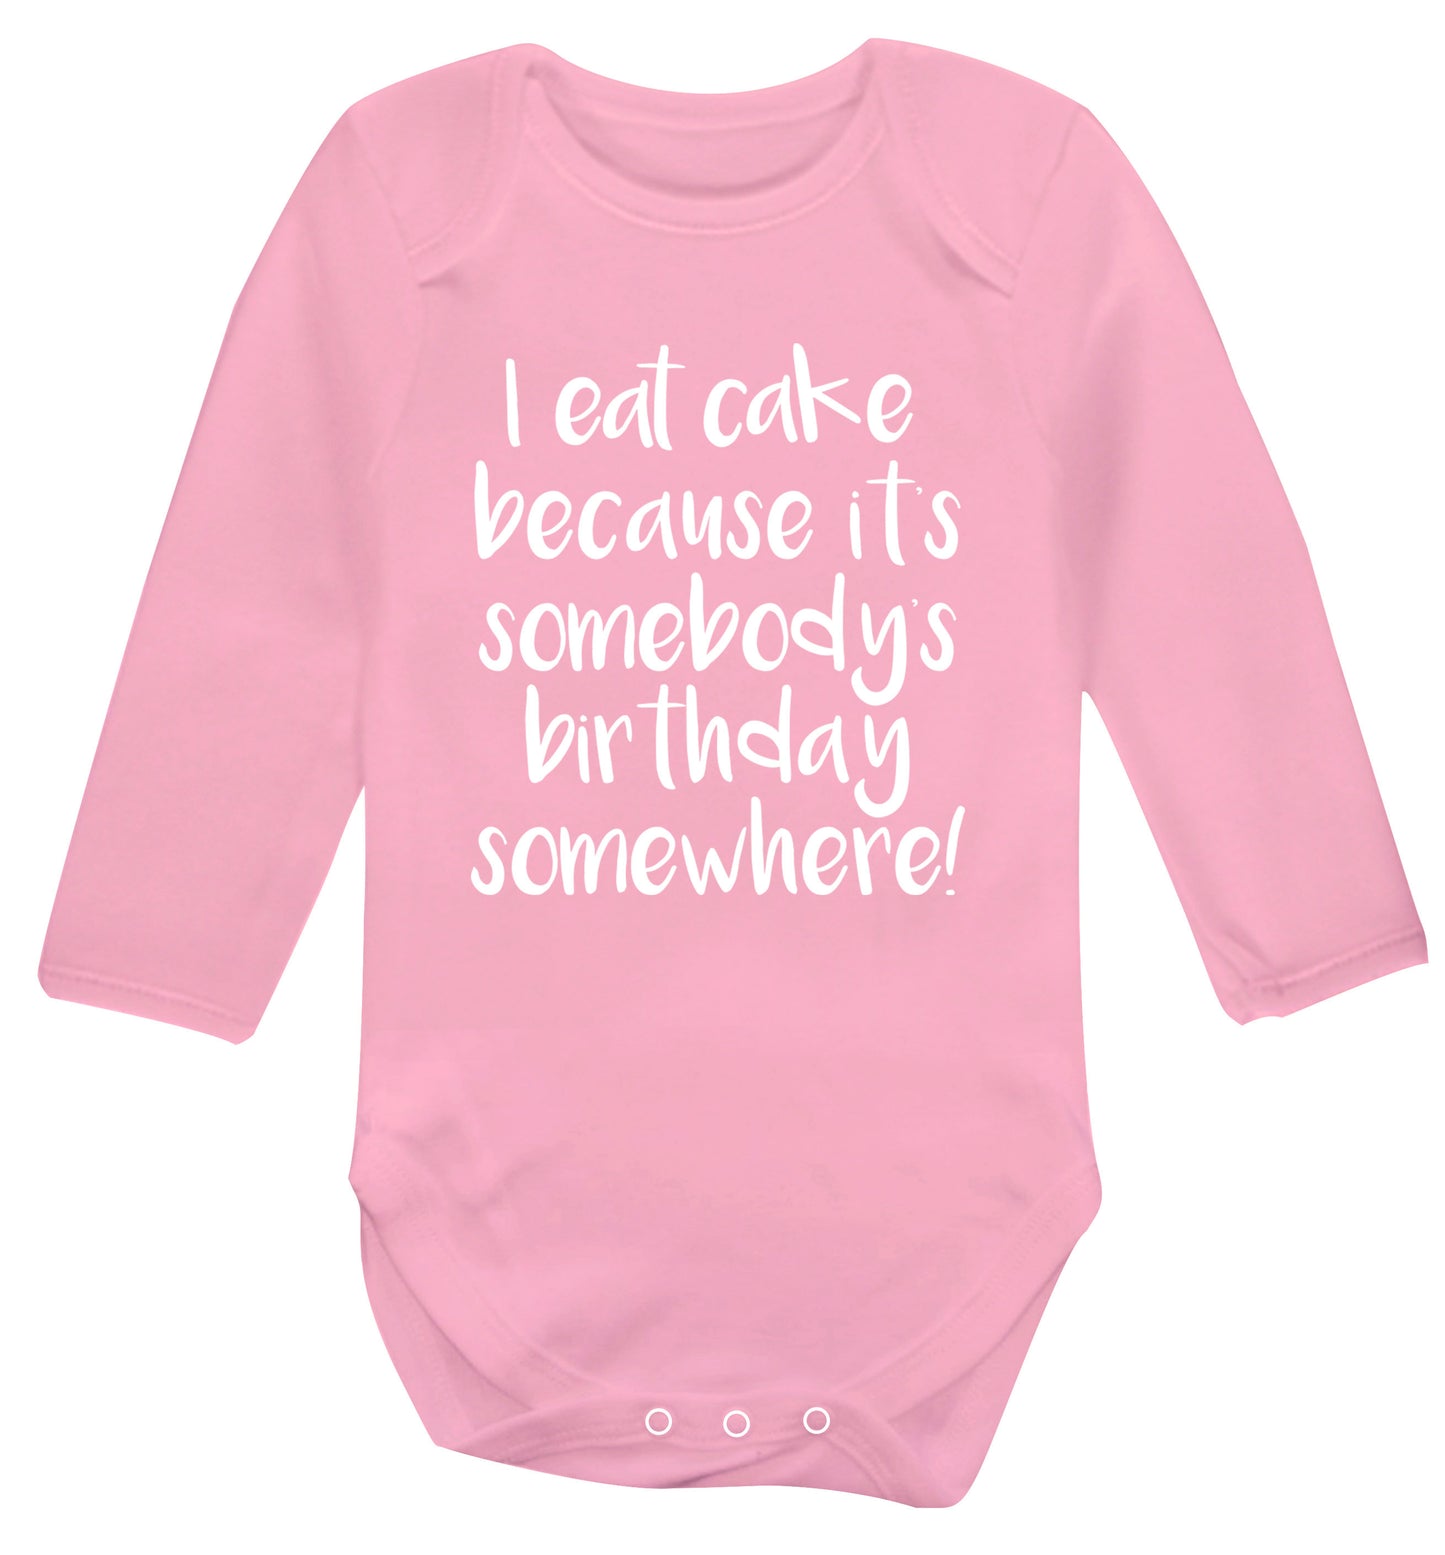 I eat cake because it's somebody's birthday somewhere! Baby Vest long sleeved pale pink 6-12 months